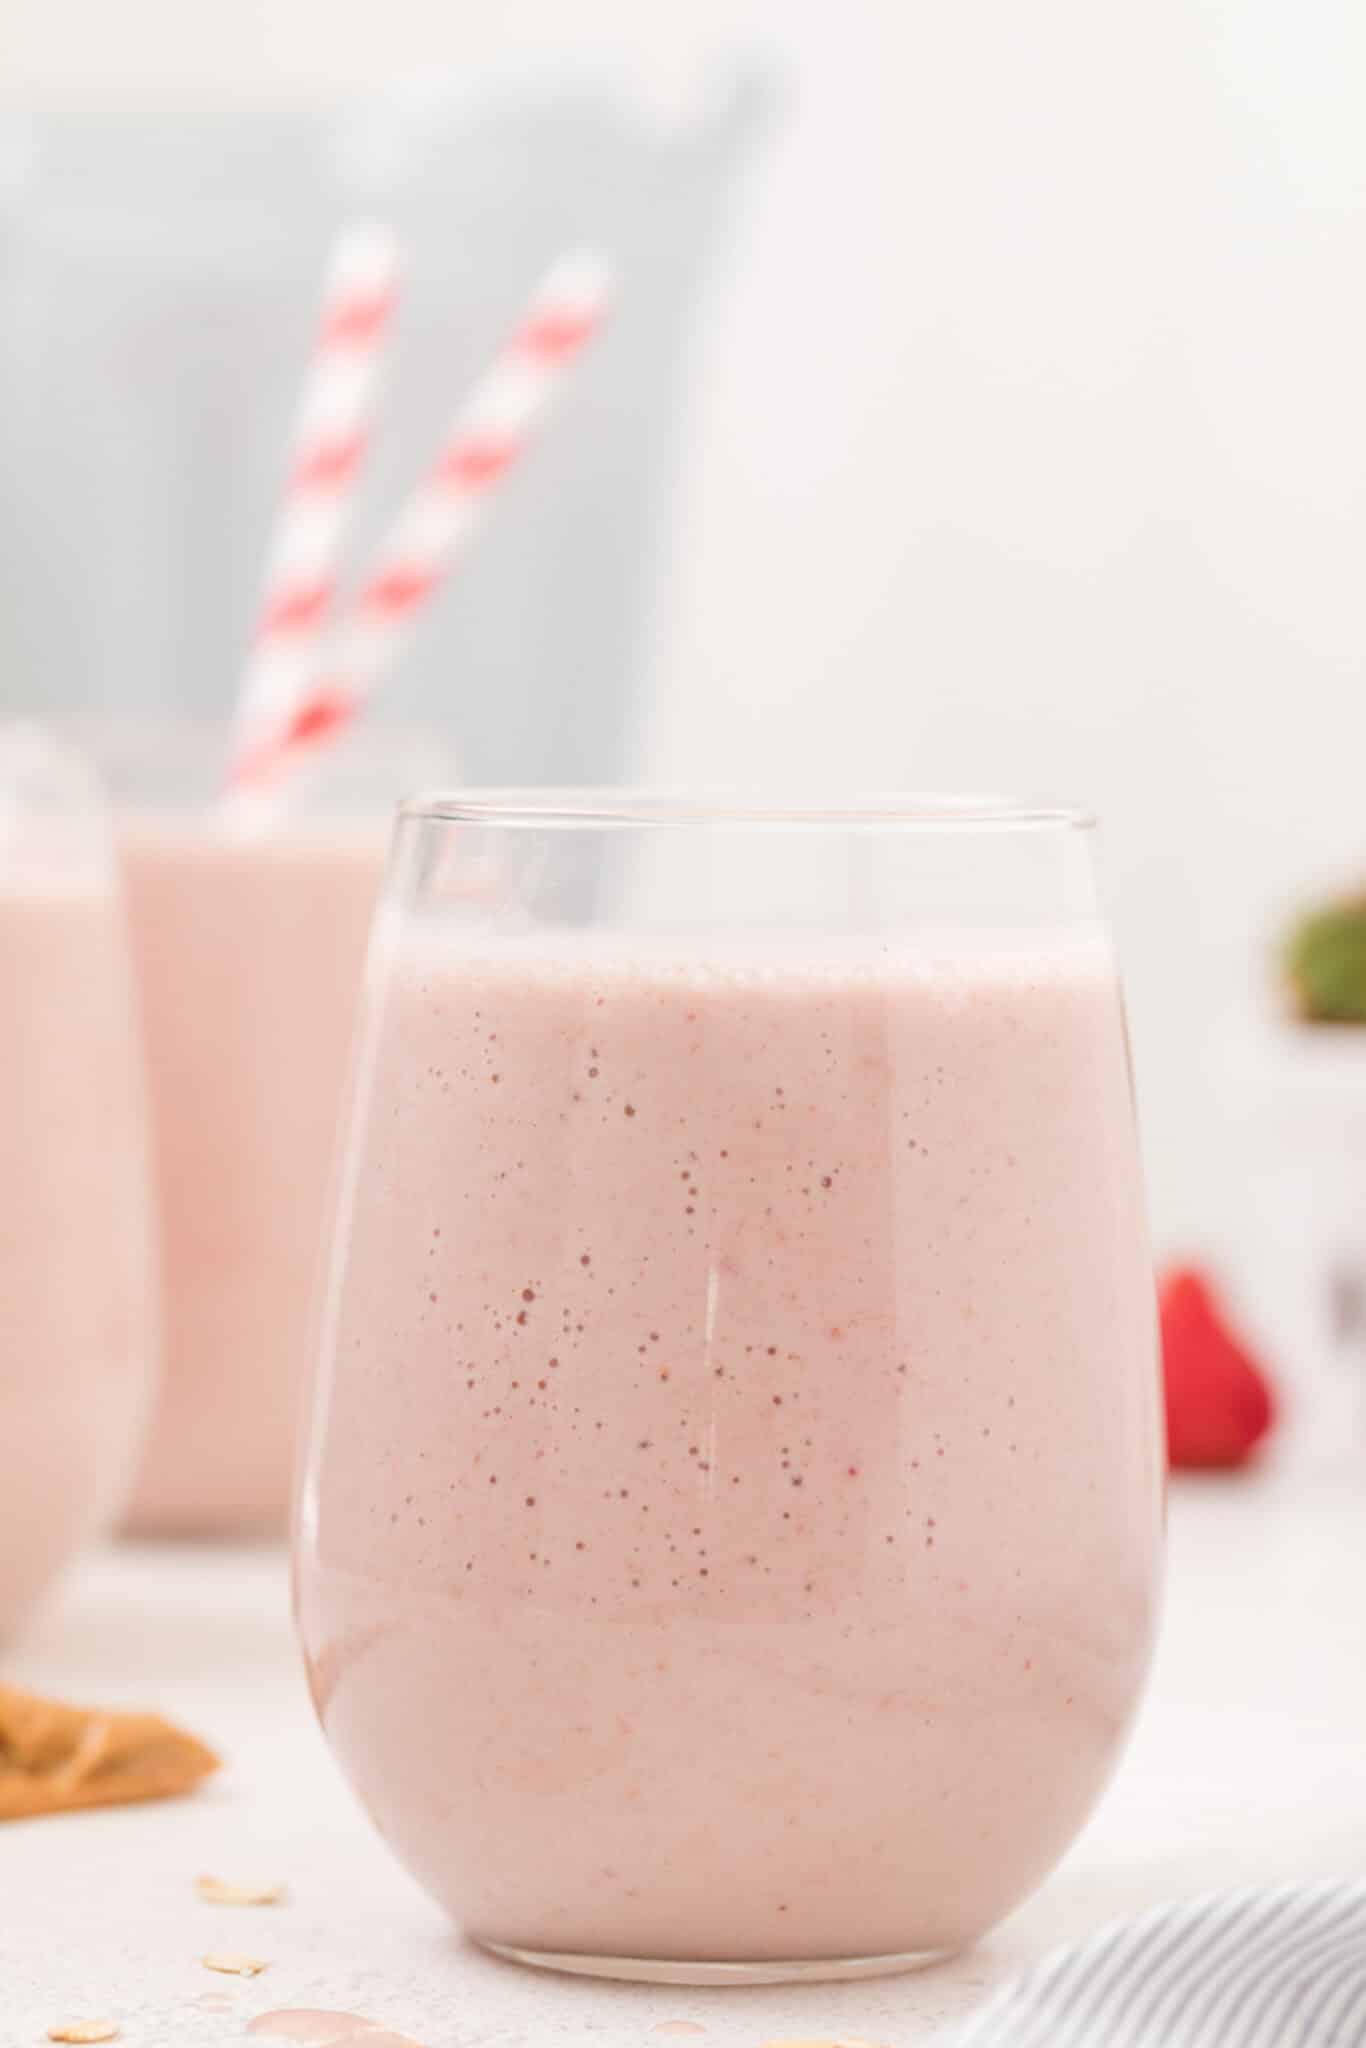 strawberry protein smoothie in a glass on a tabletop.